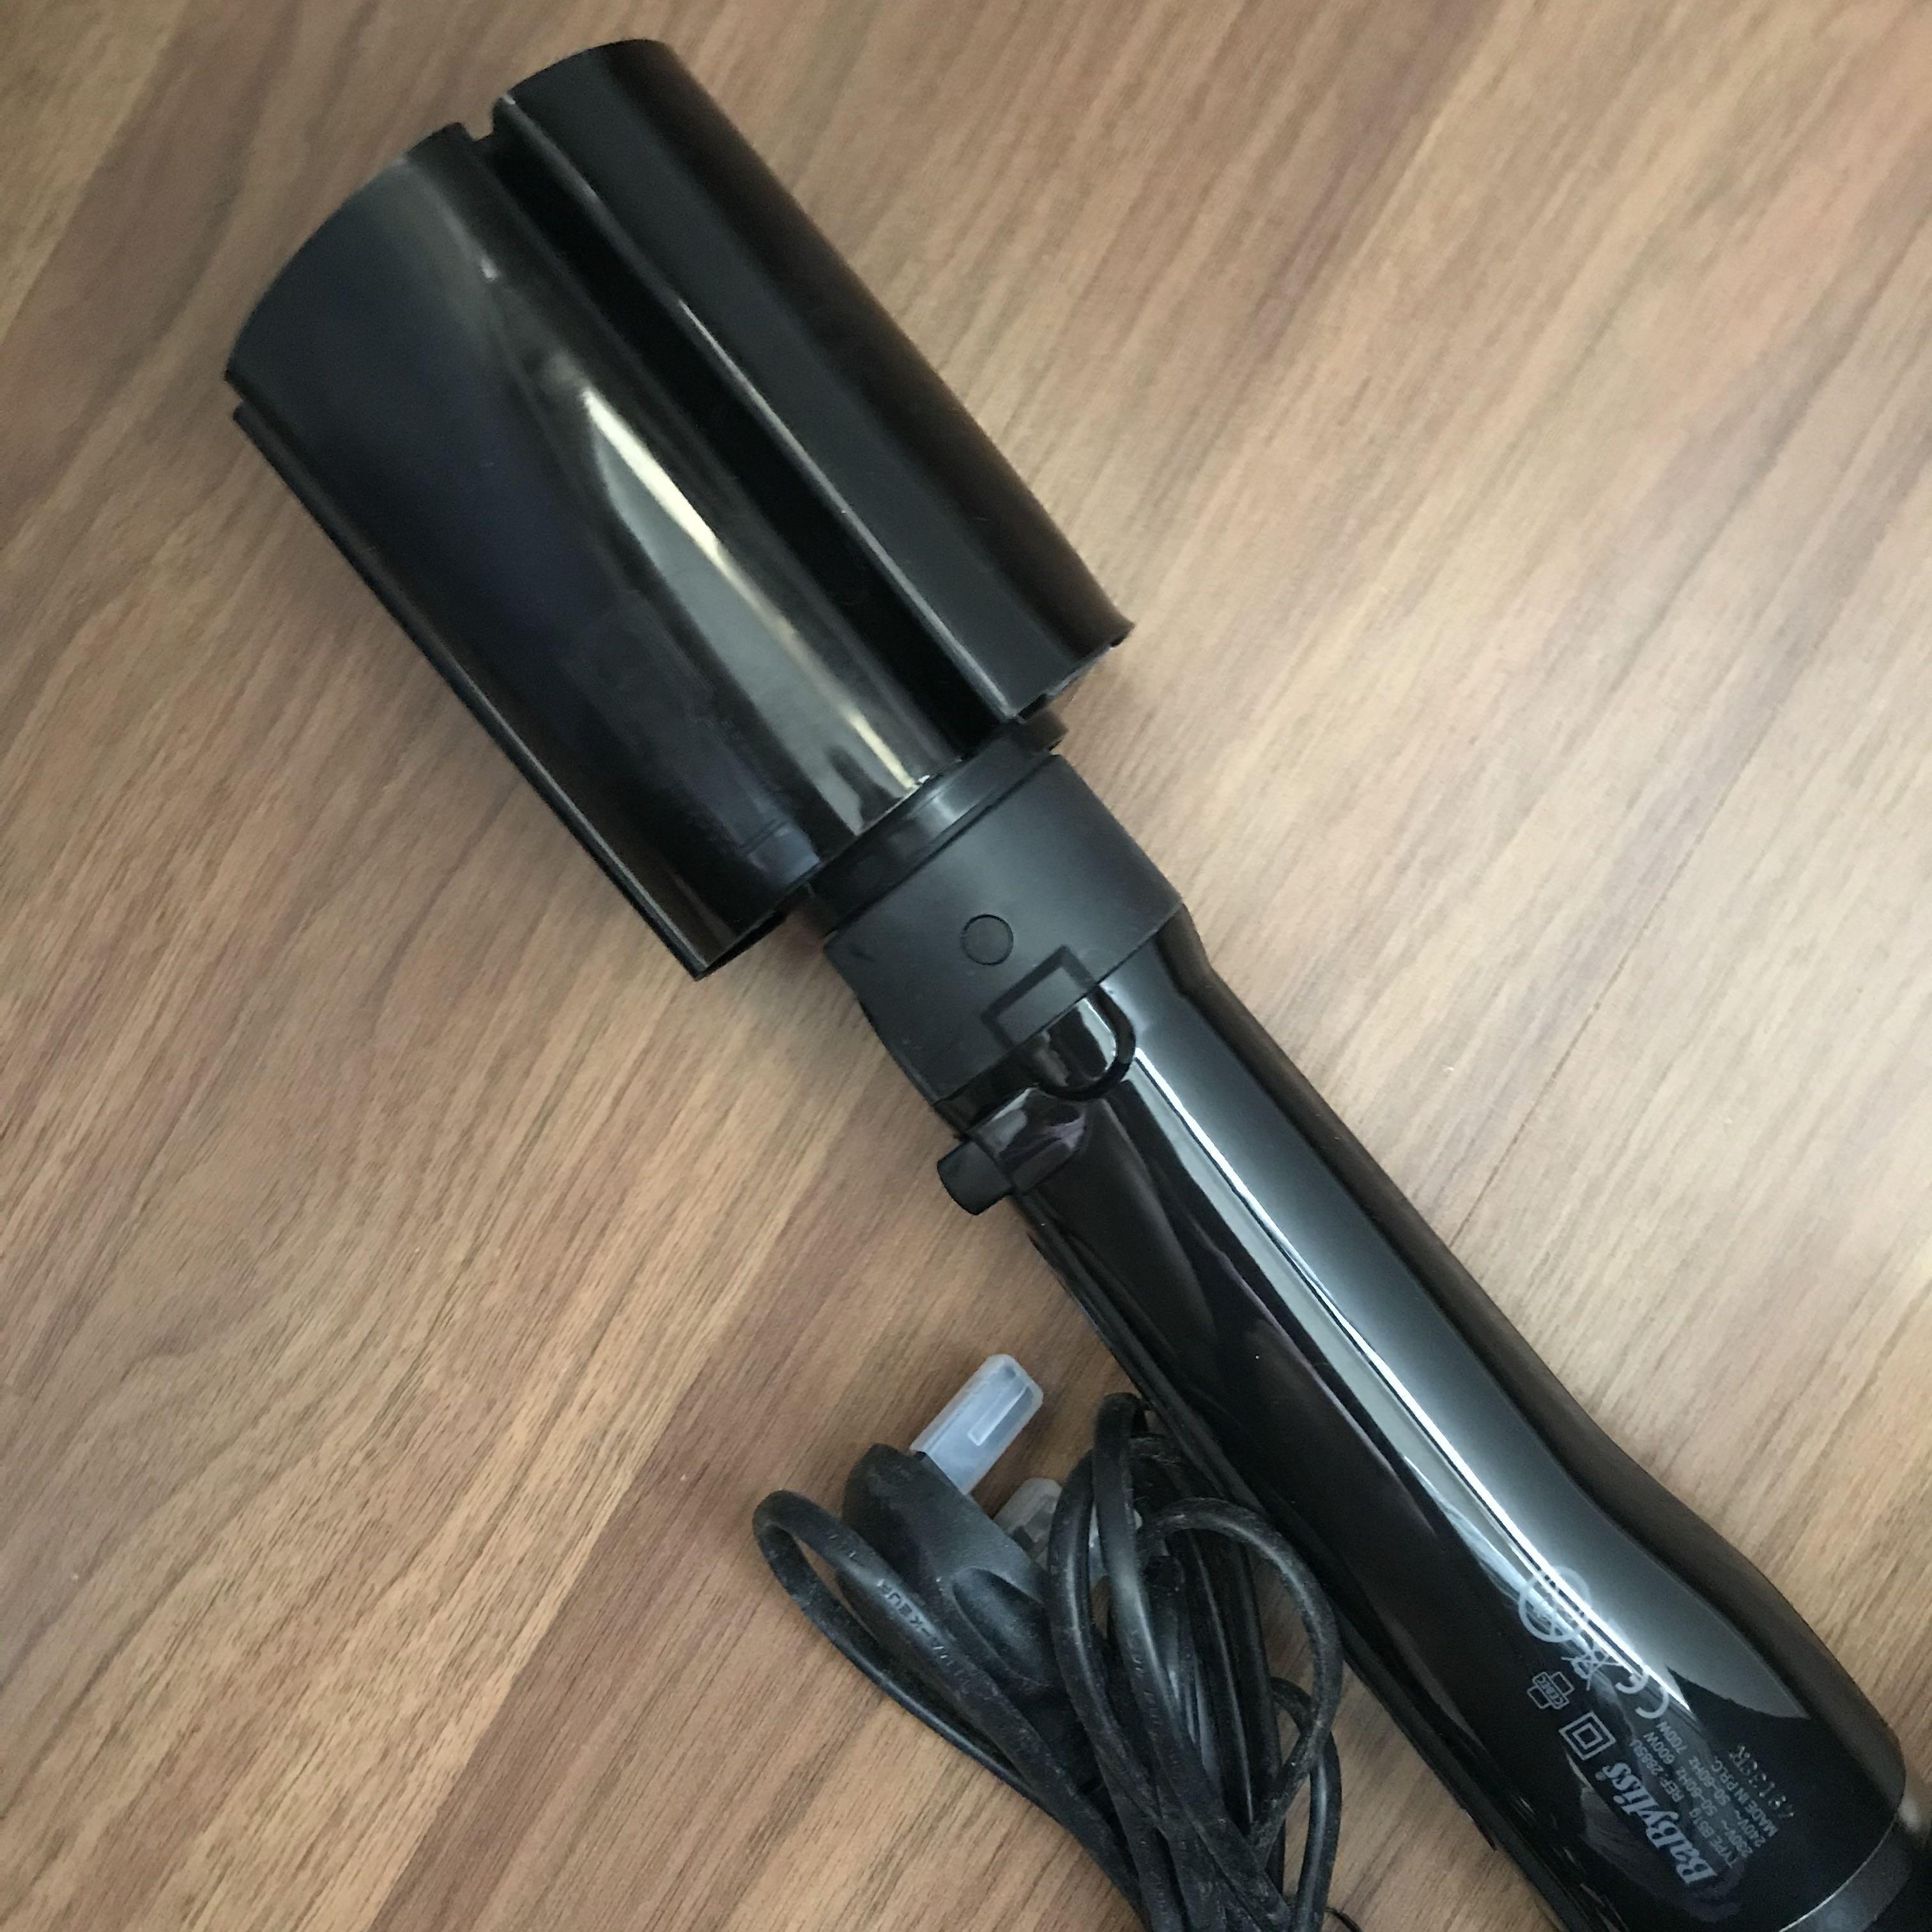 BaByliss Big Hair Spinning Brush, Beauty & Personal Care, Hair on Carousell